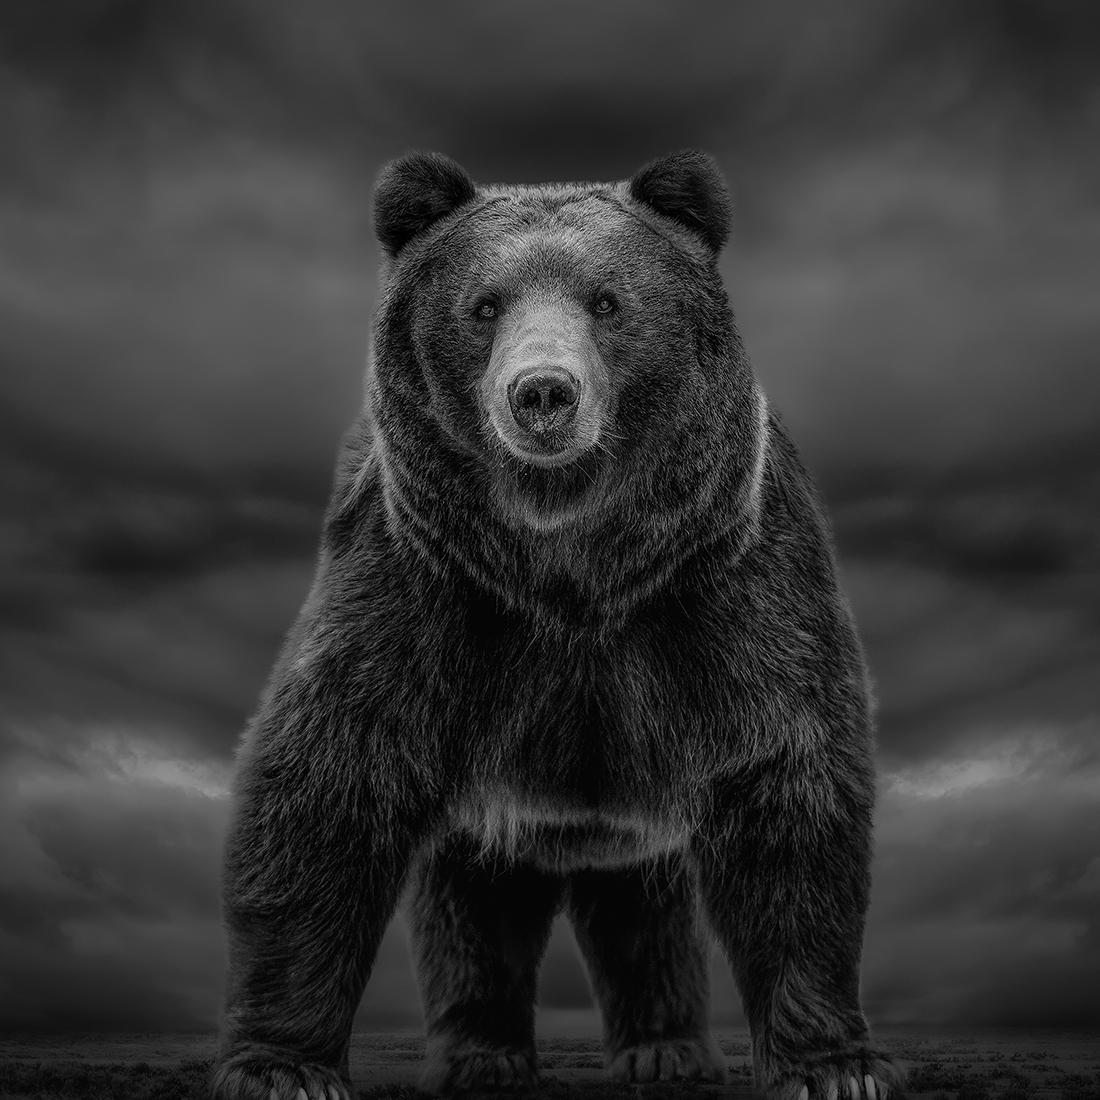 Shane Russeck Animal Print - 36x24 "Times like These"  Black & White Photography, Brown Bear Photograph Art 